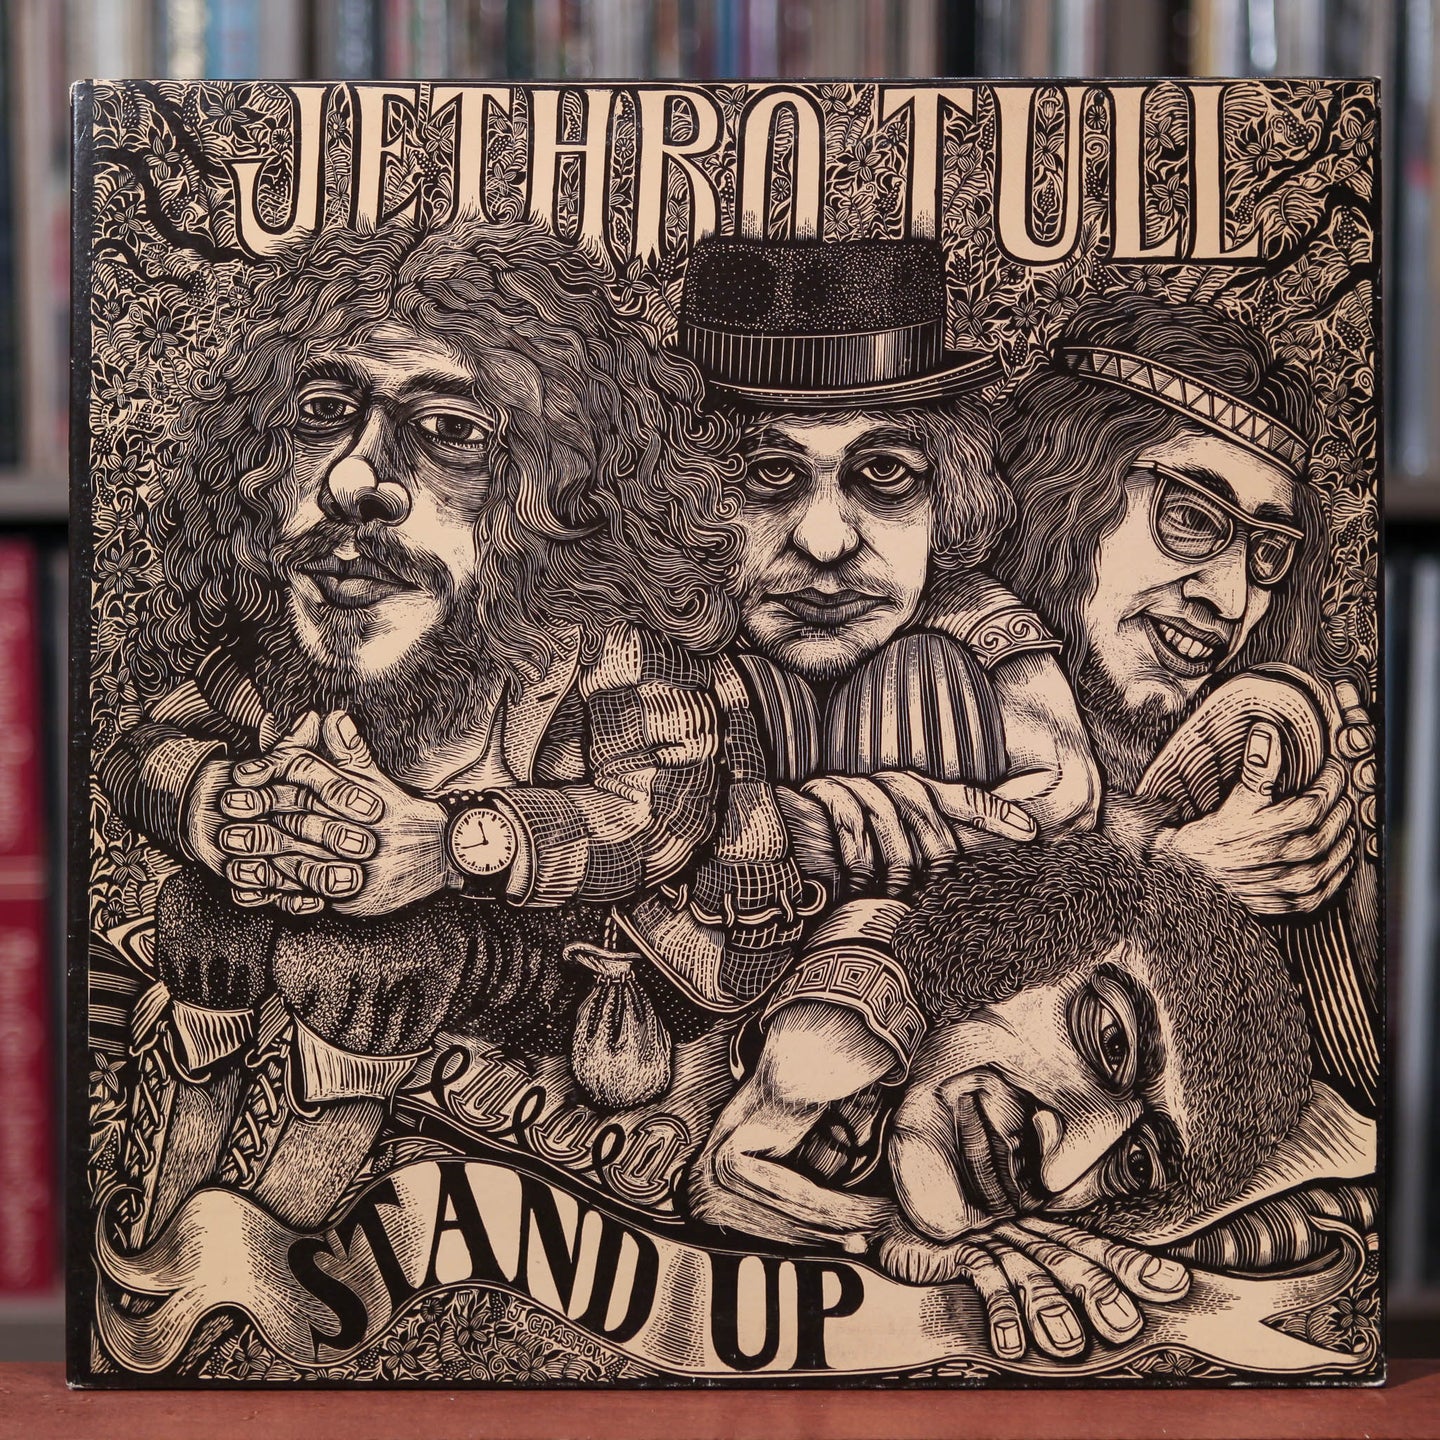 Jethro Tull - Stand Up - 1969 Reprise, EX/VG+